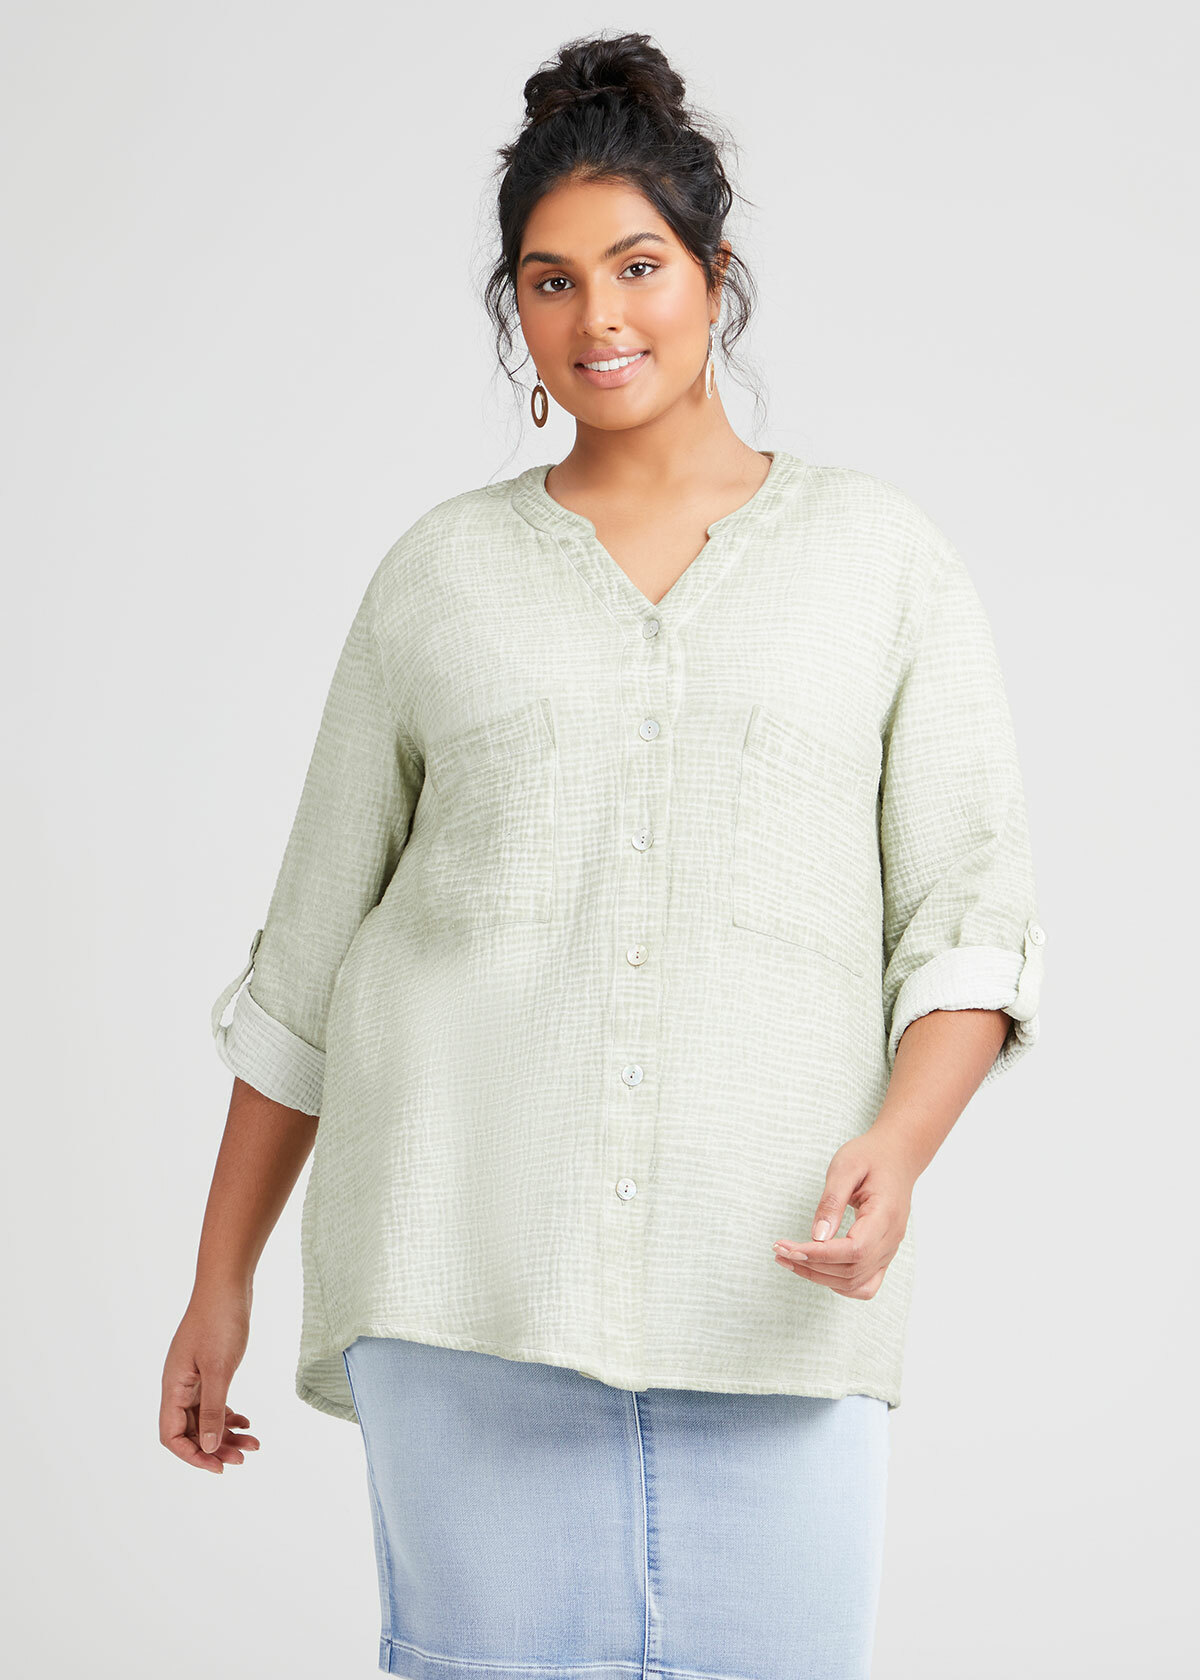 Shop Plus Size Cotton Double Gauze Cuff Top in Green | Sizes 12-30 ...